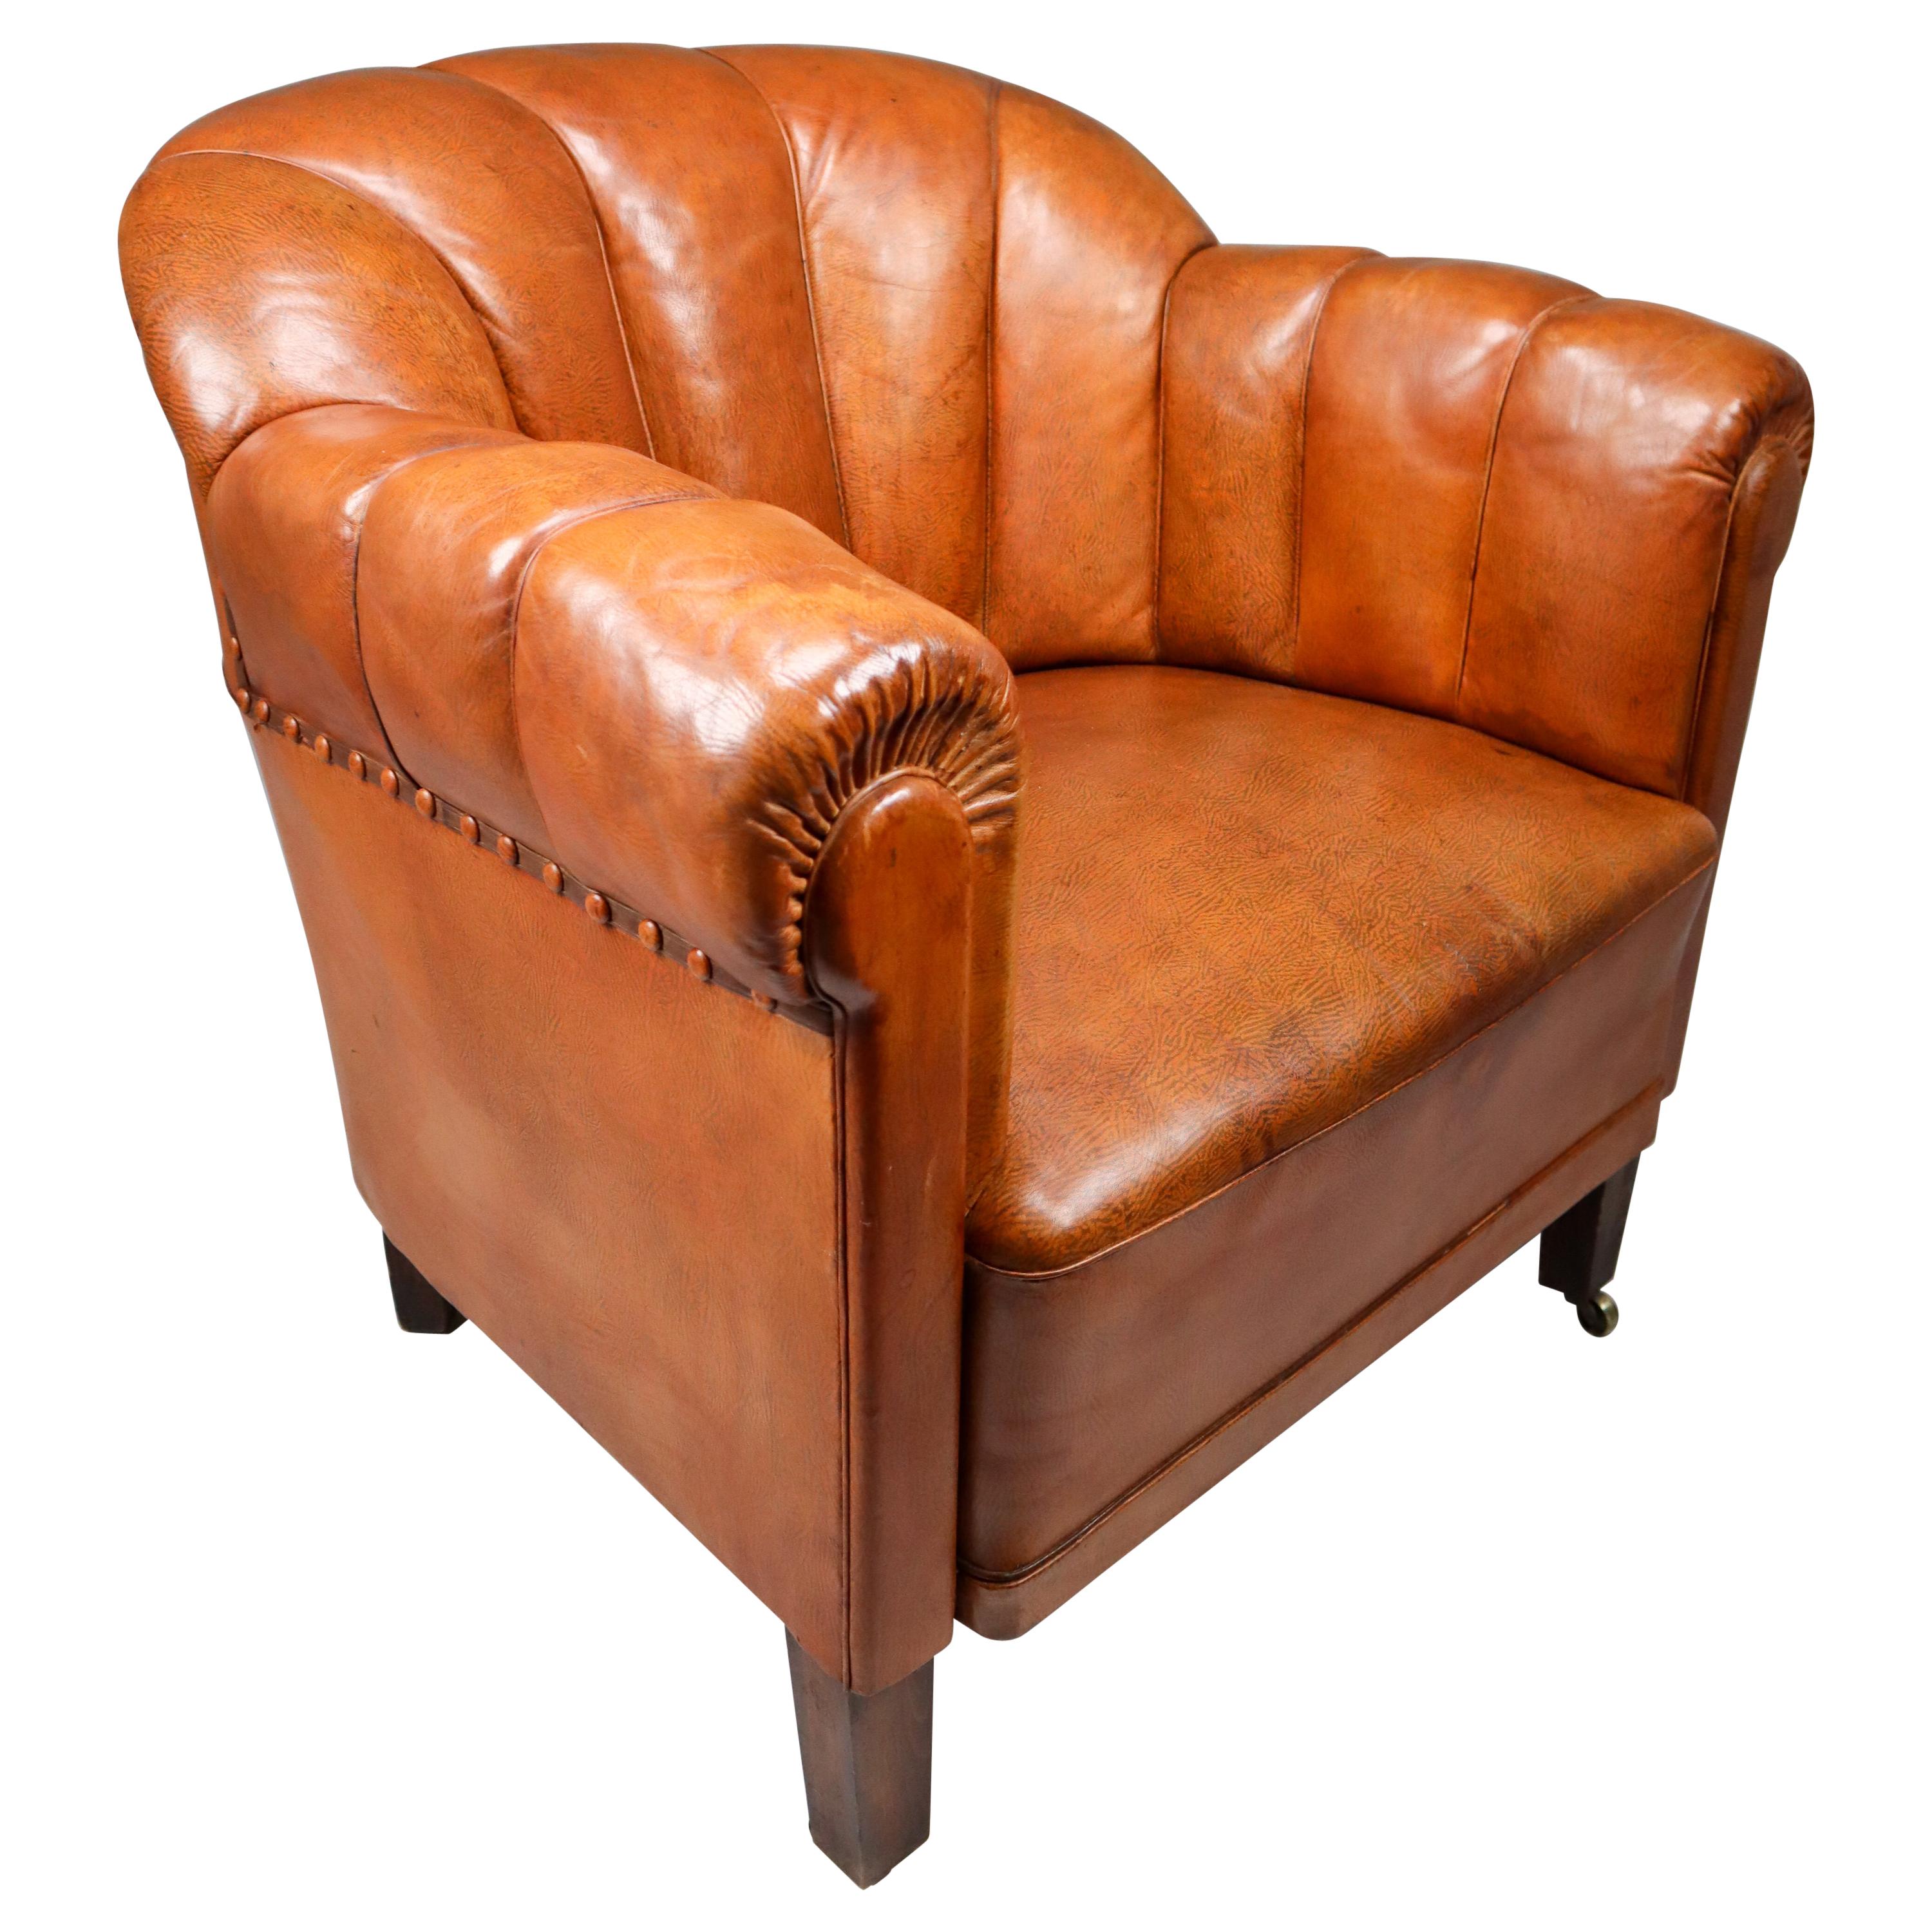 Art Deco Club Chair in Patinated Cognac Leather, Praque, 1930s